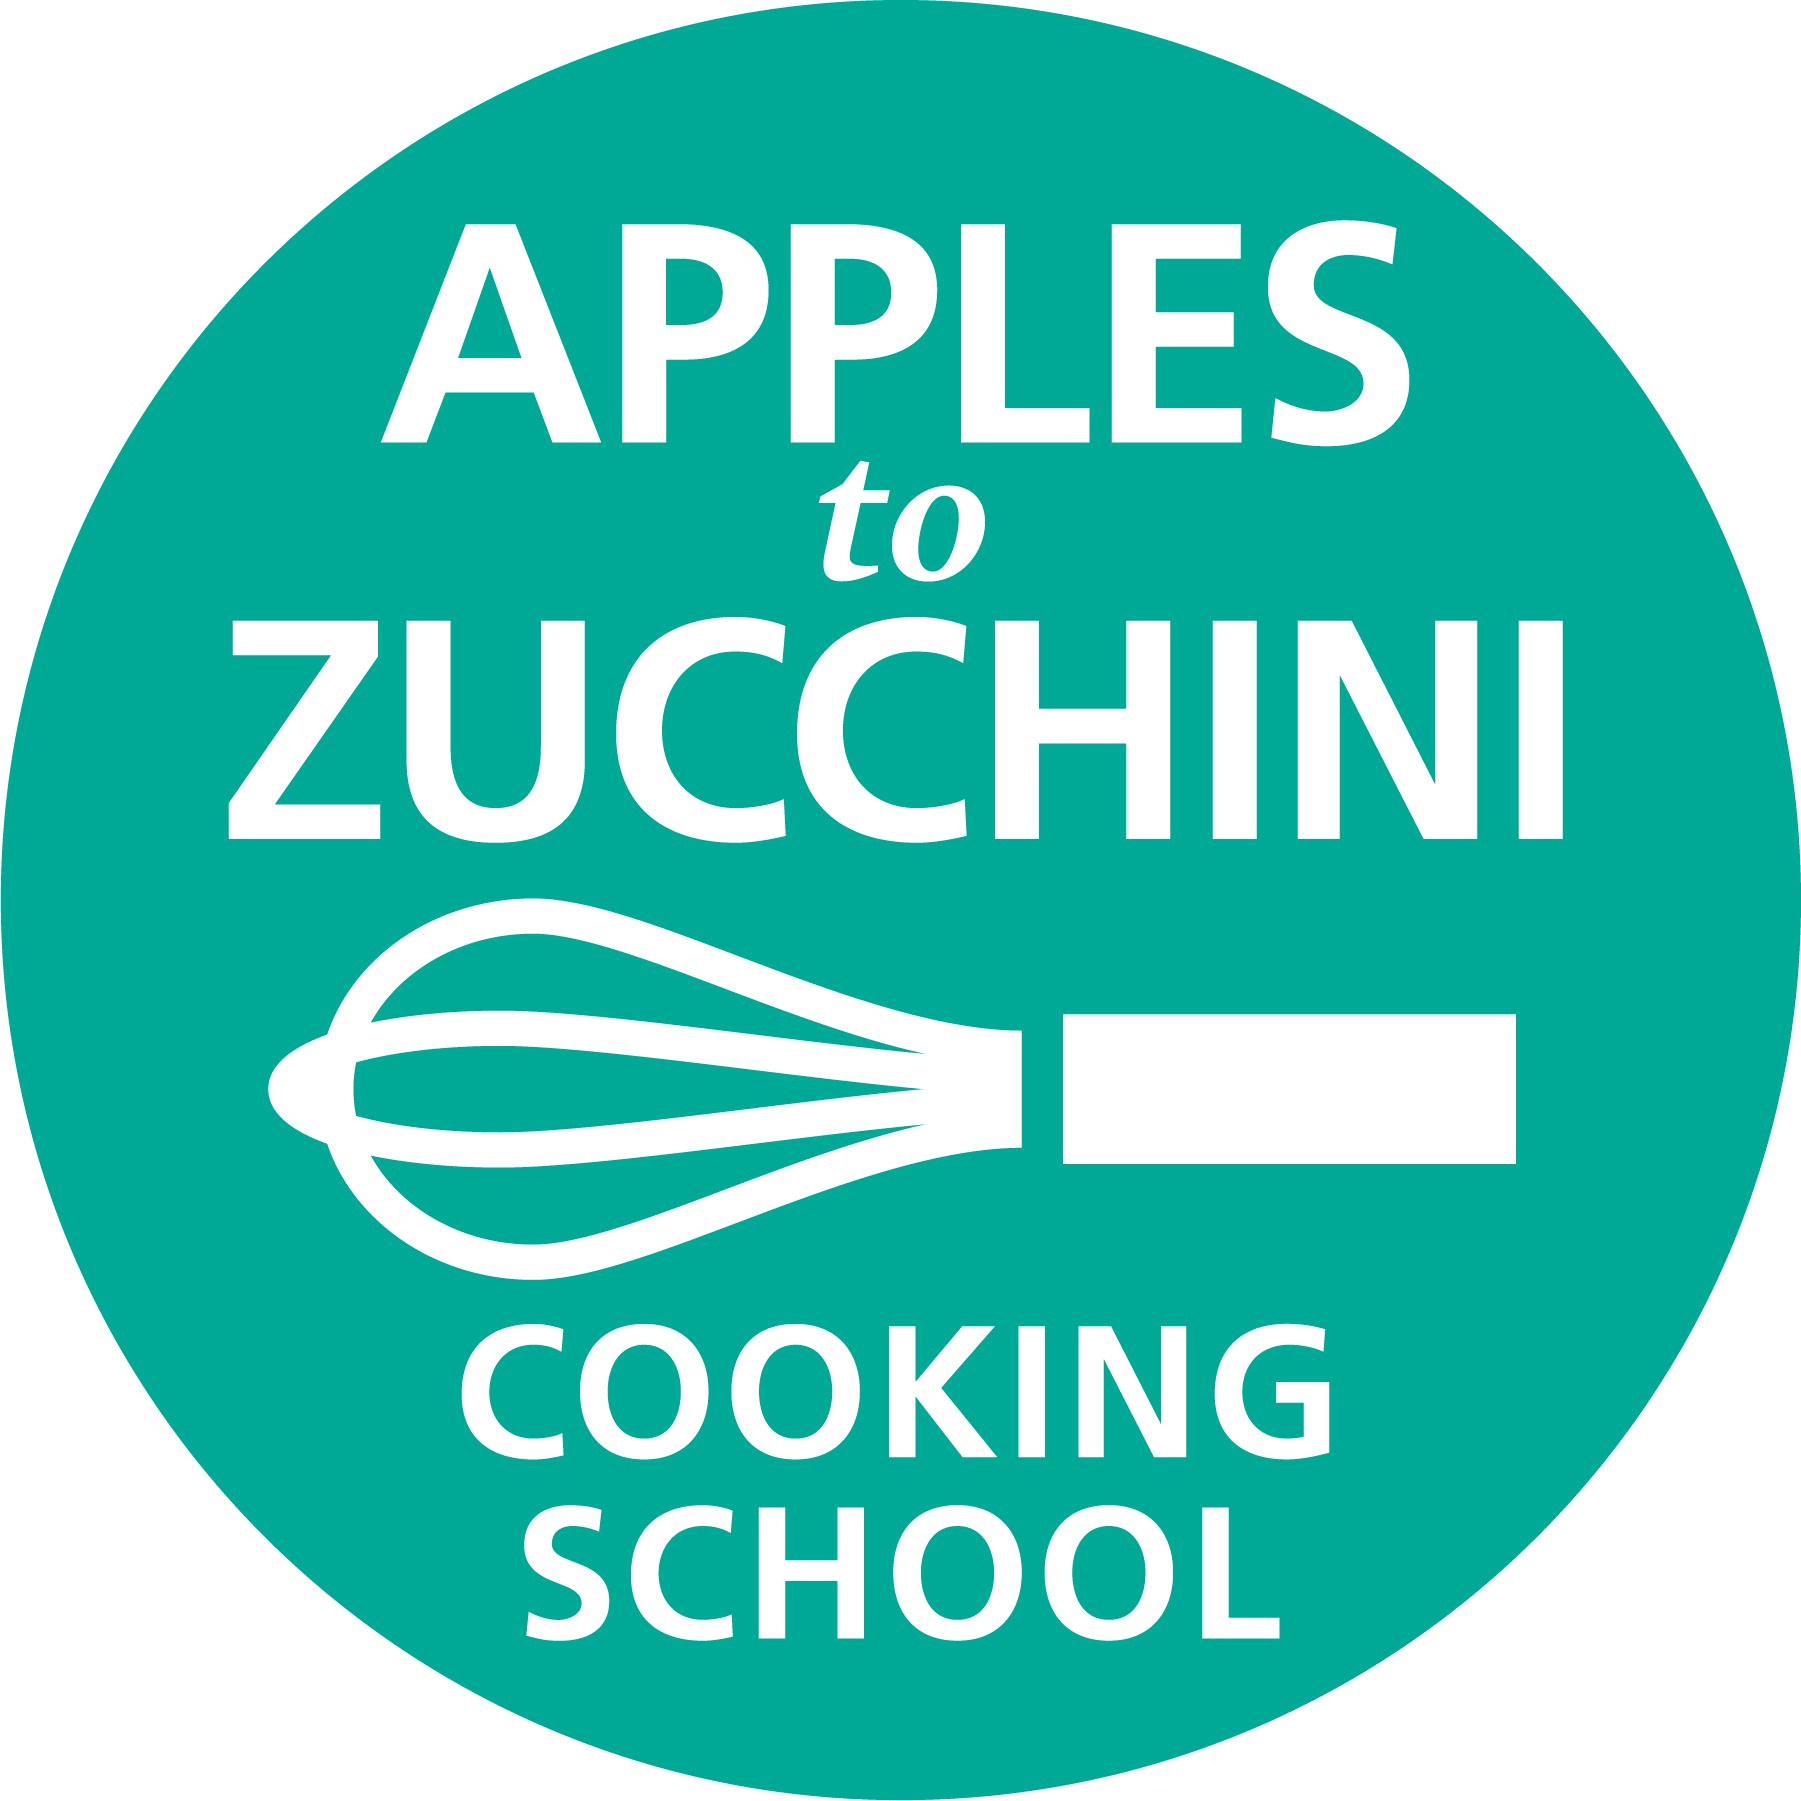 Apples to Zucchini Cooking School logo